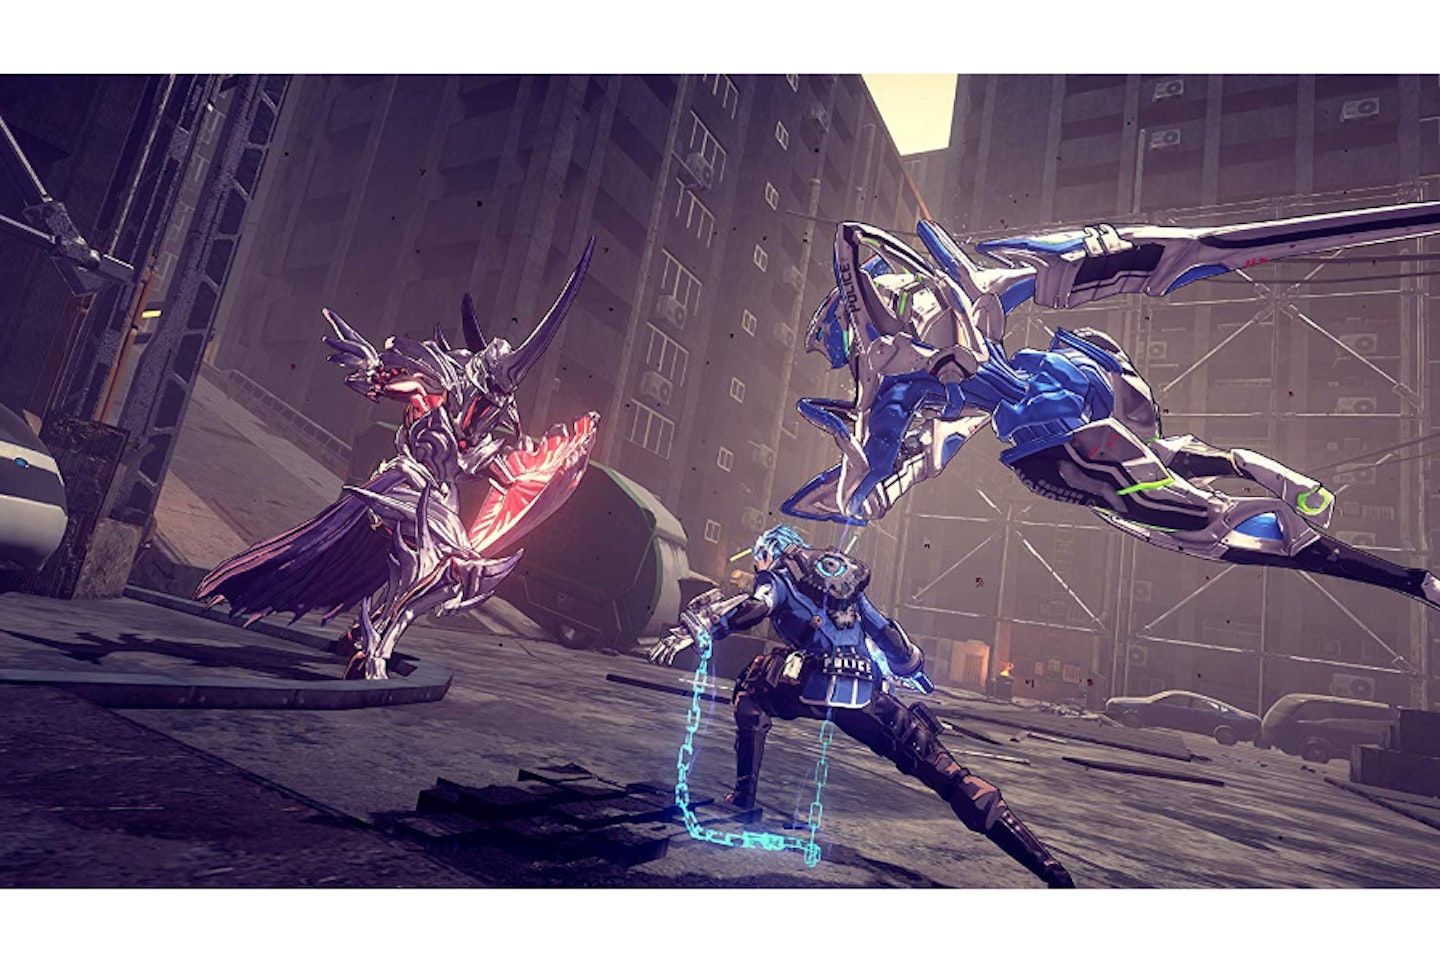 Astral Chain (Switch)